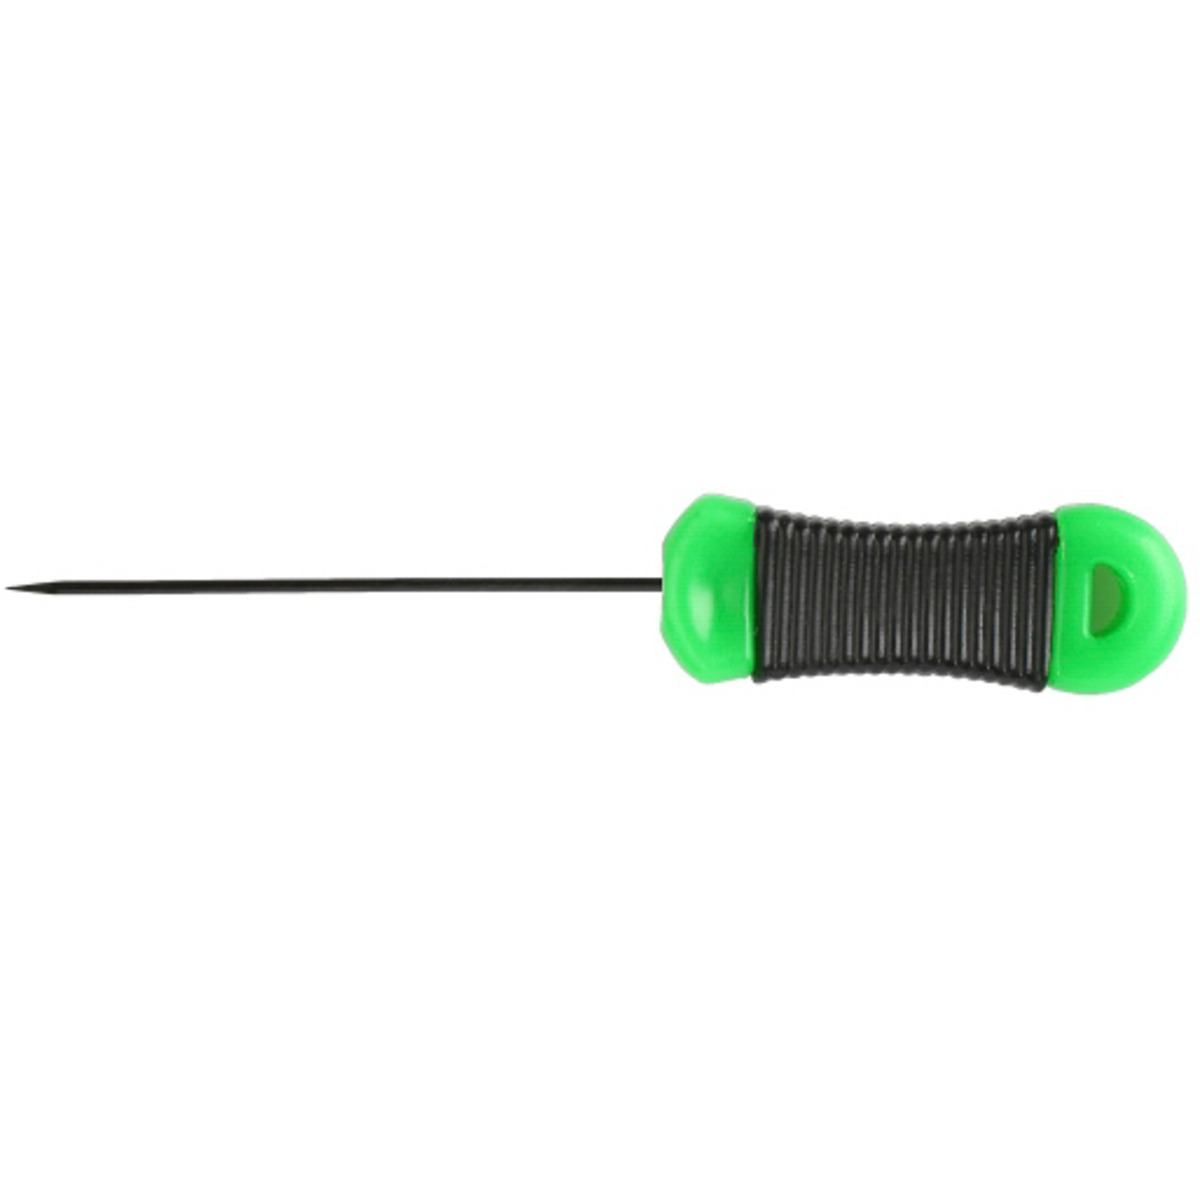 Mikado Baiting Needle - METHOD FEEDER FOR STOPPERS